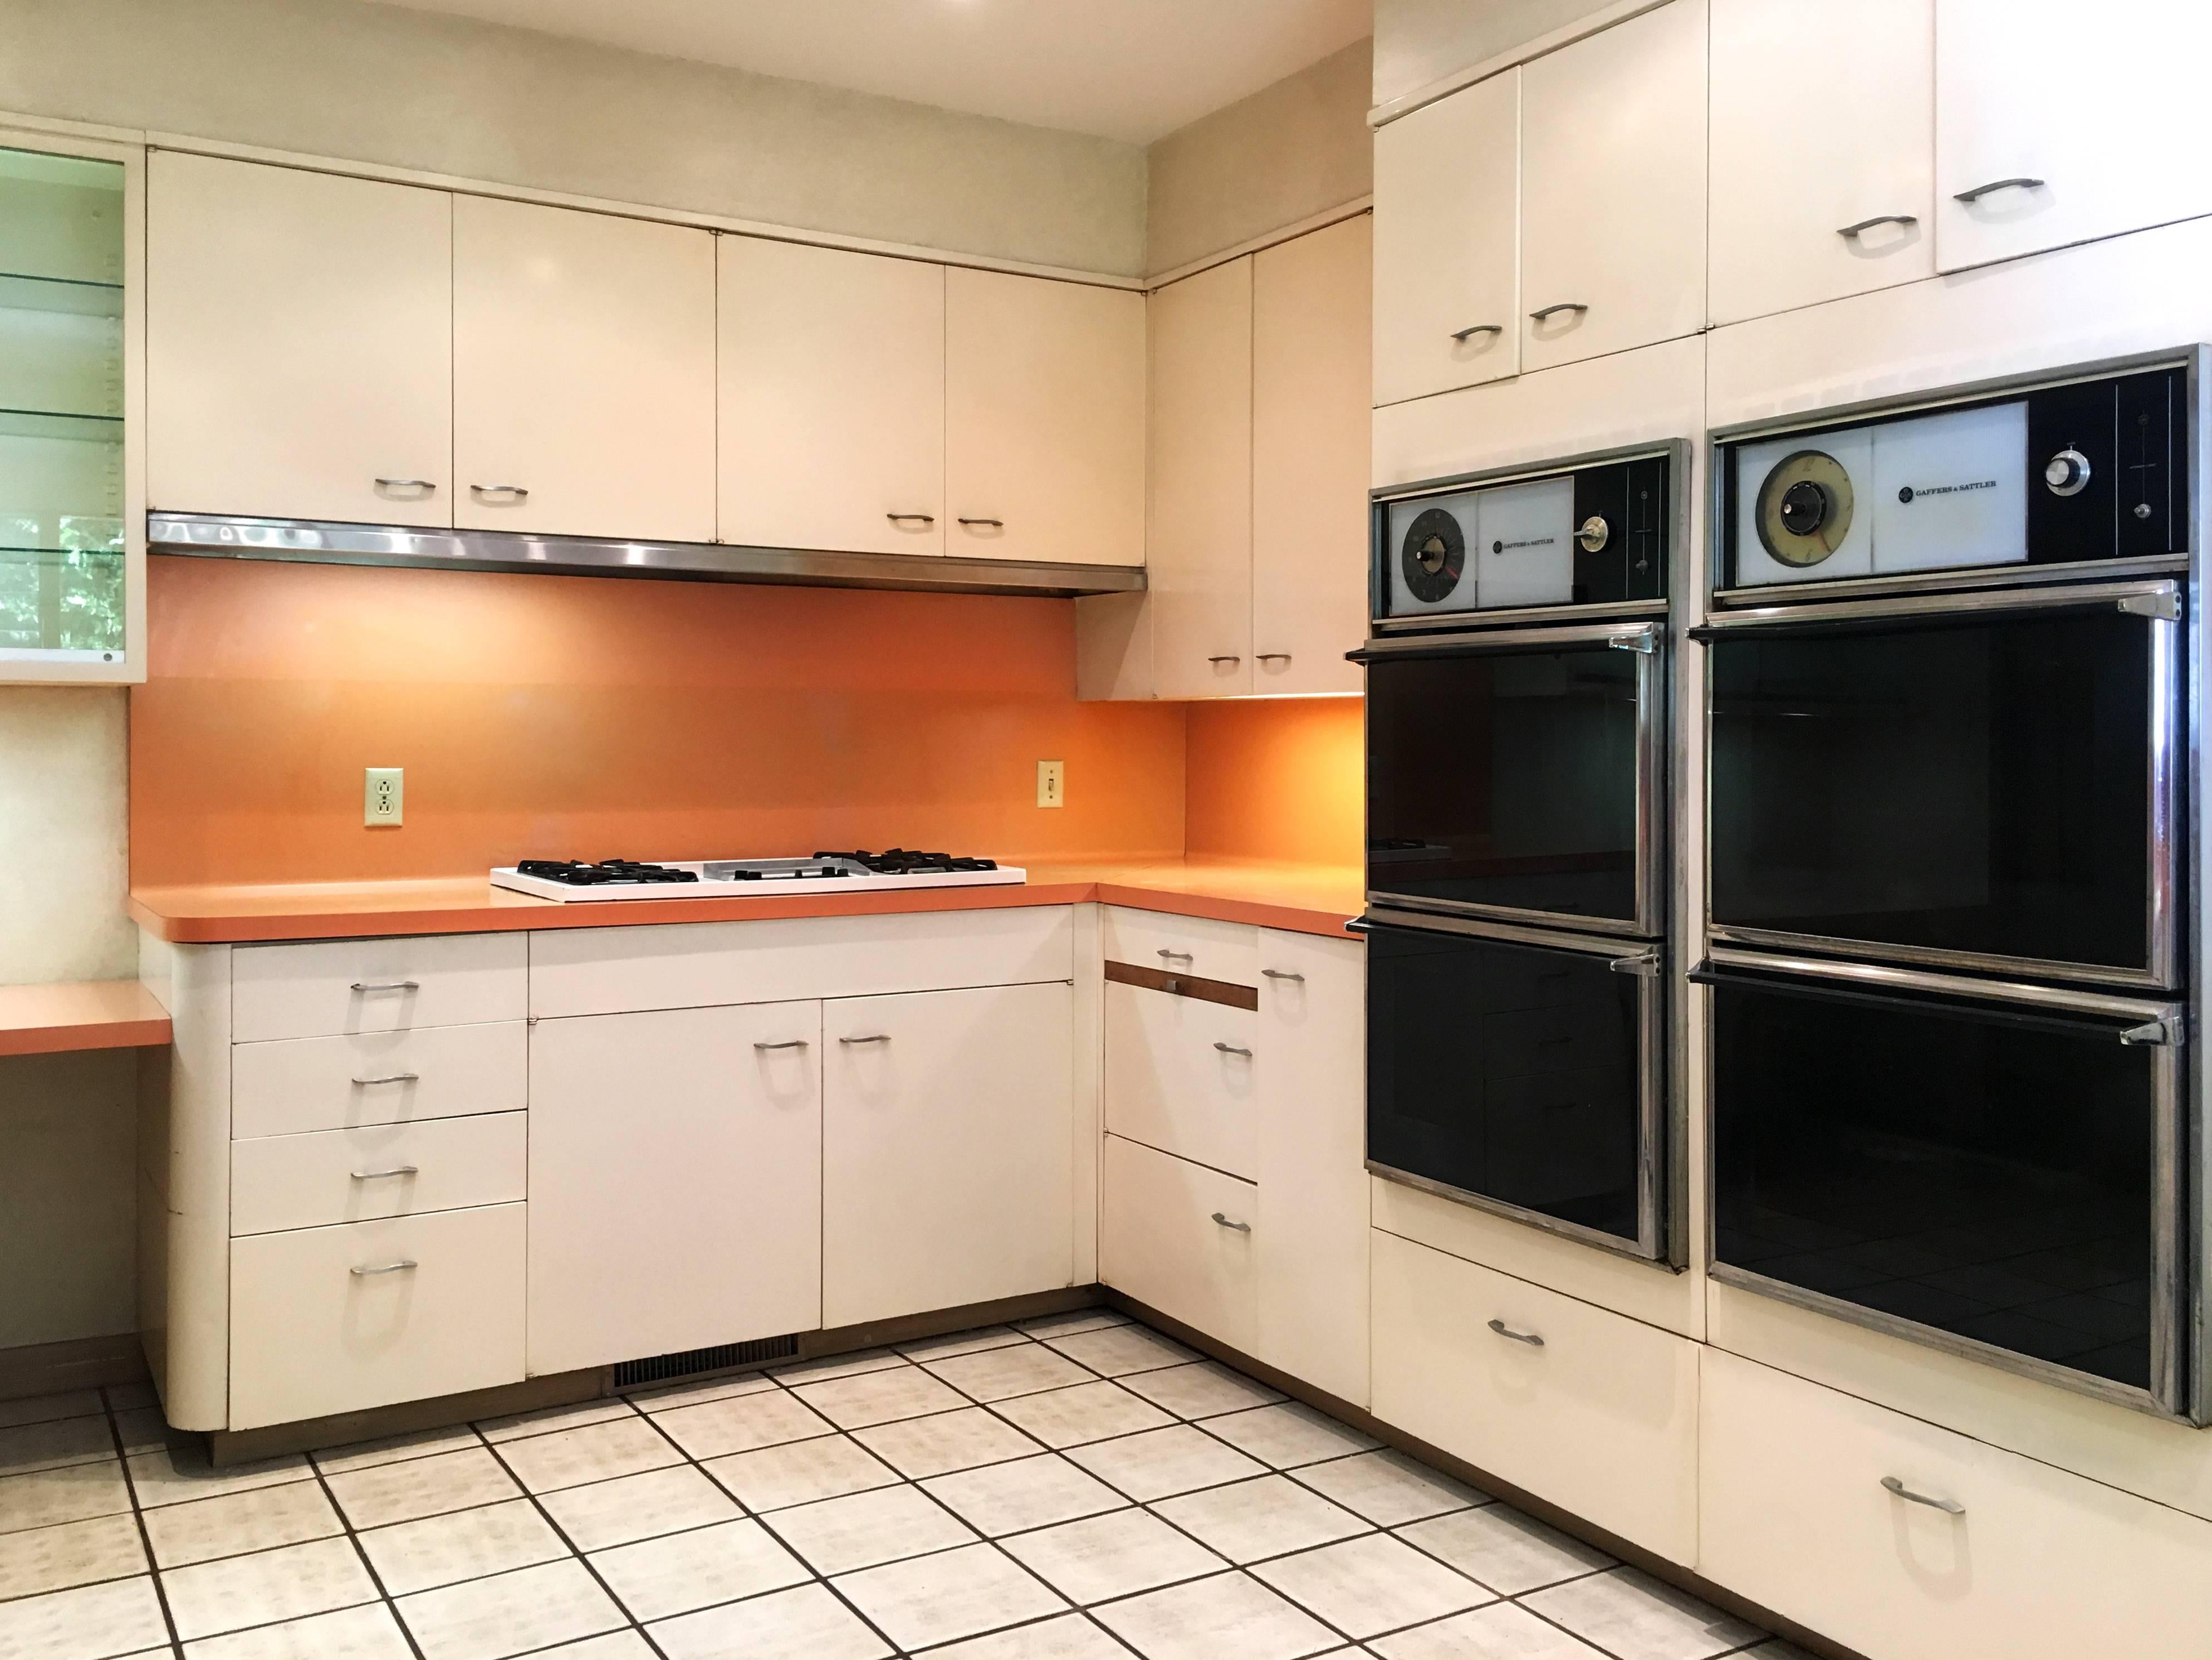 For sale is a coveted St. Charles midcentury modern kitchen and pantry, custom built in the early 1960s for a historic Beverly Hills estate. Includes six ceiling to floor walls of cabinets, glass displays, drawers, appliances and/ or lockers sold as